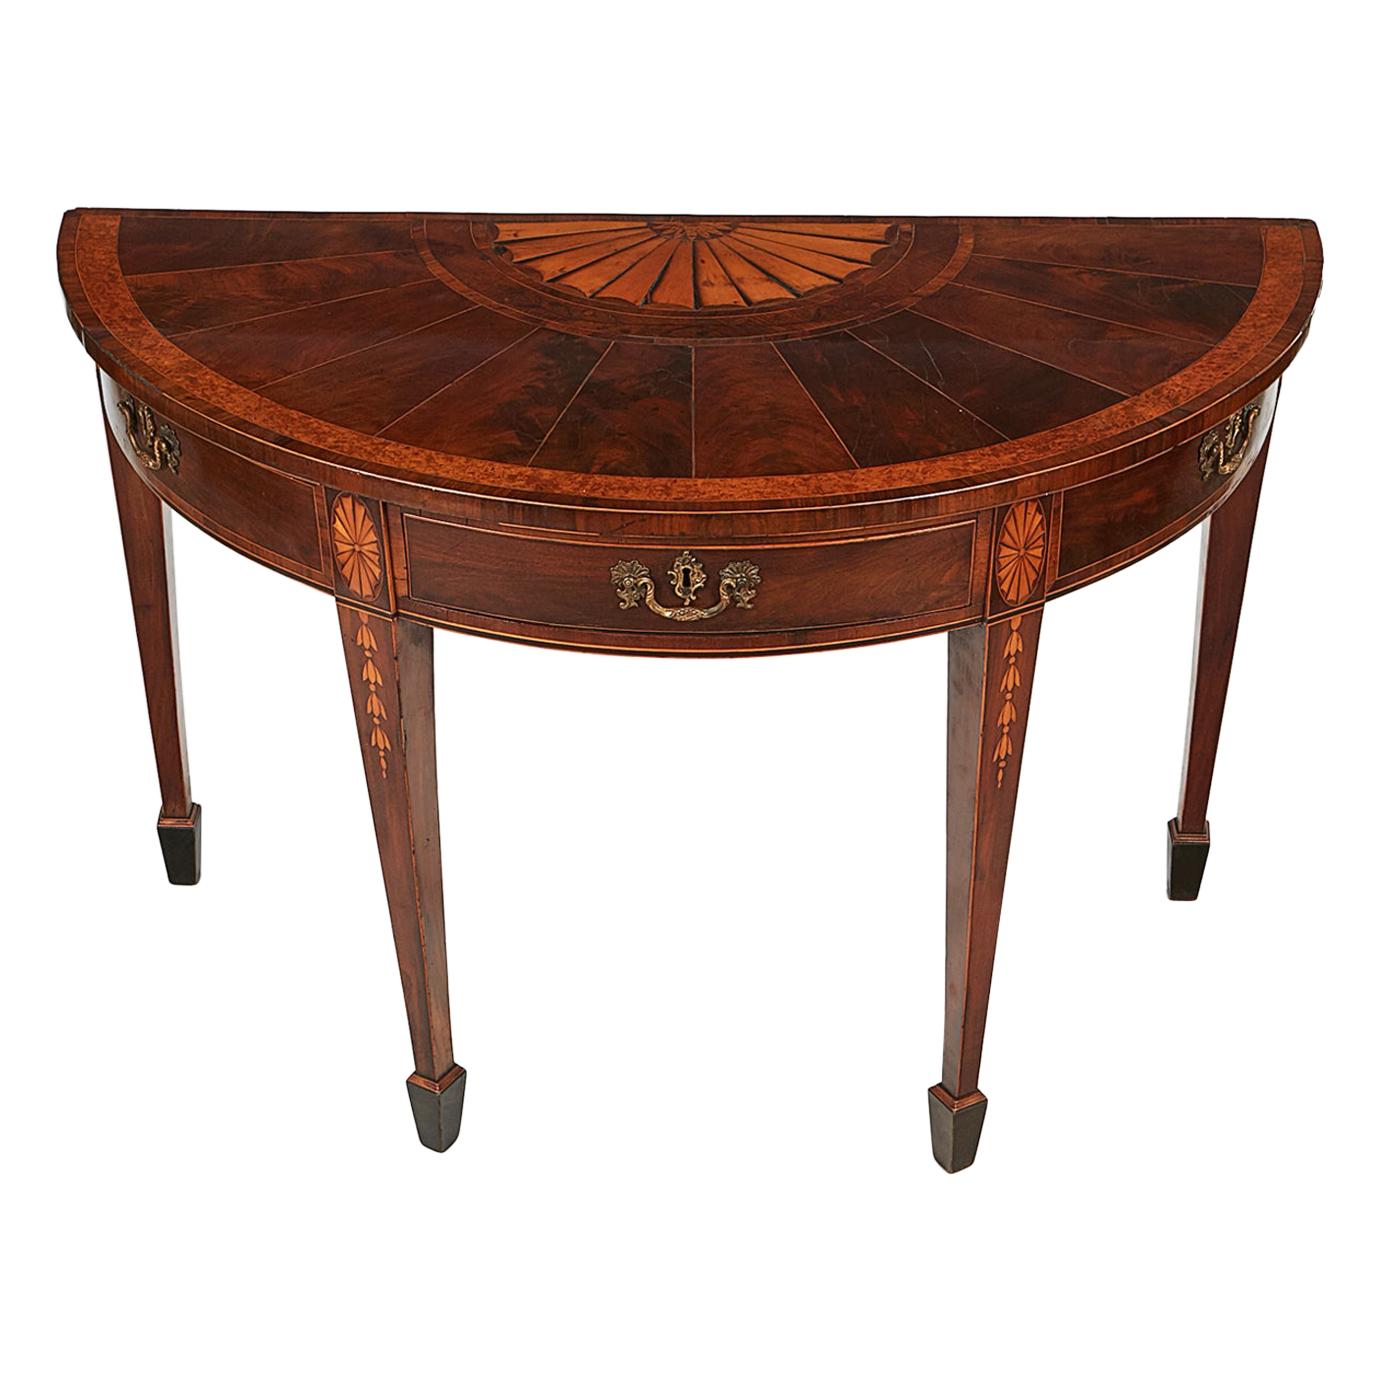 Early 19th Century Regency Demilune Table after William Moore